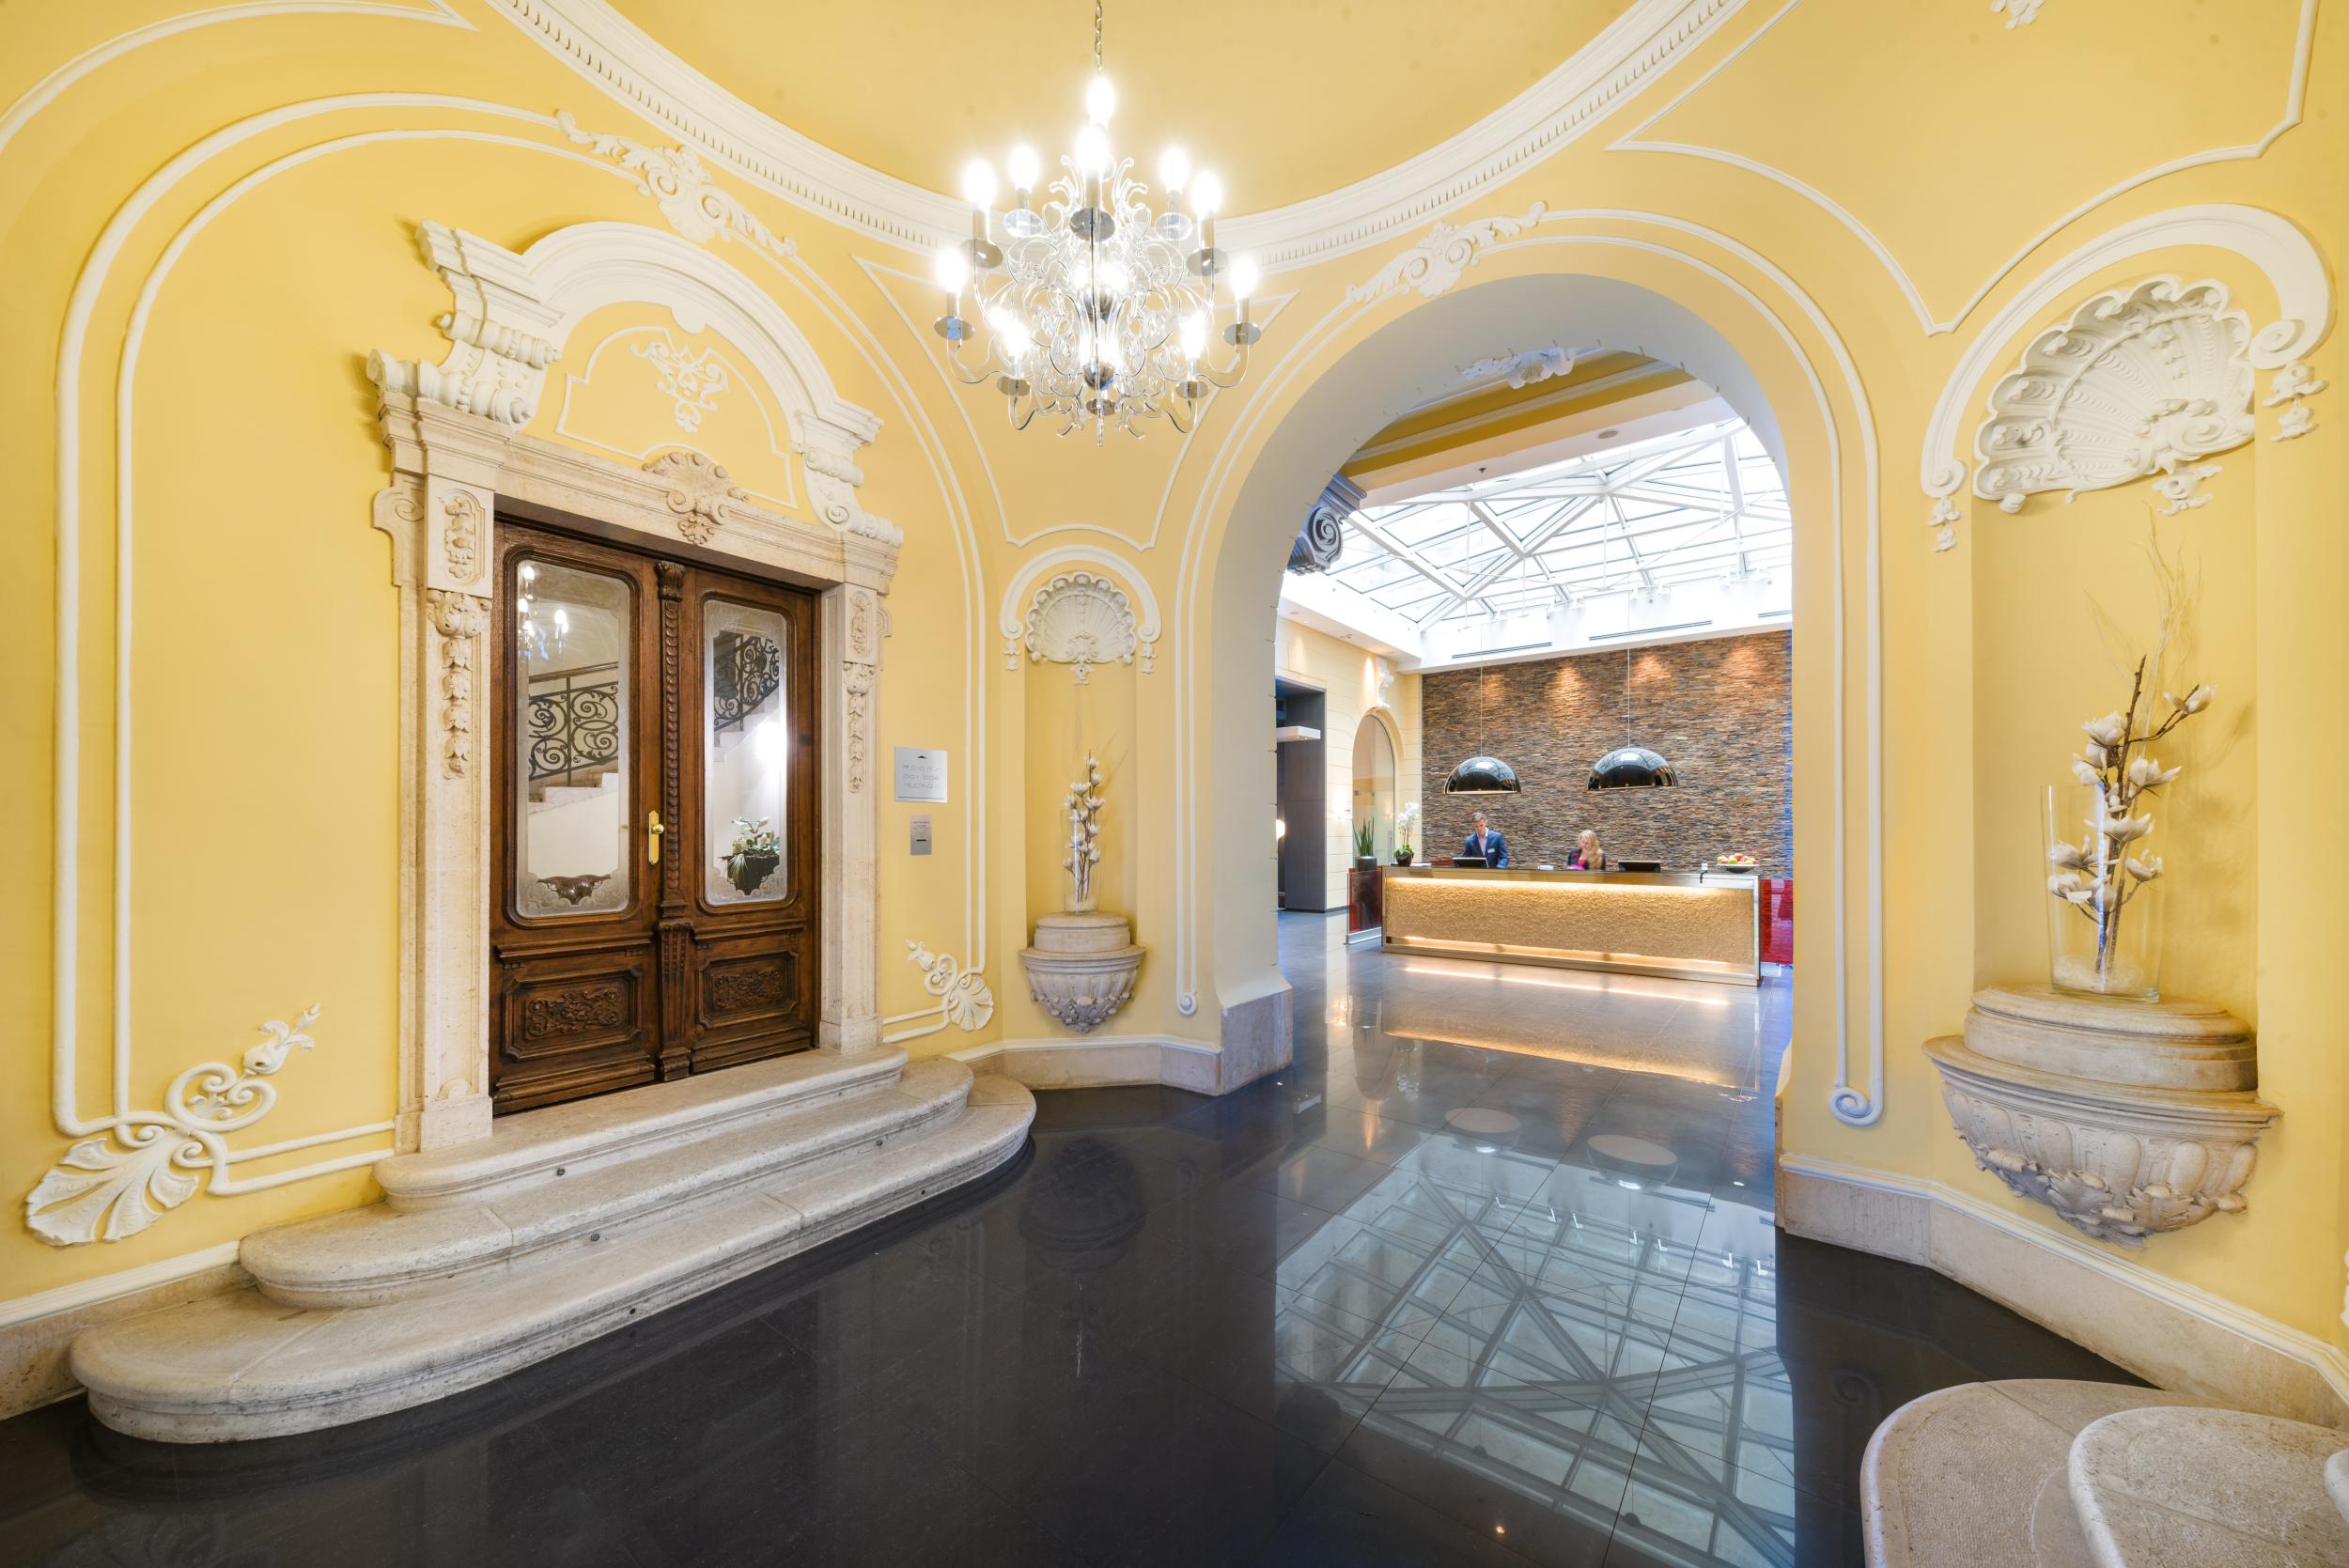 Guests seeking a regal experience will appreciate the Palazzo Zichy